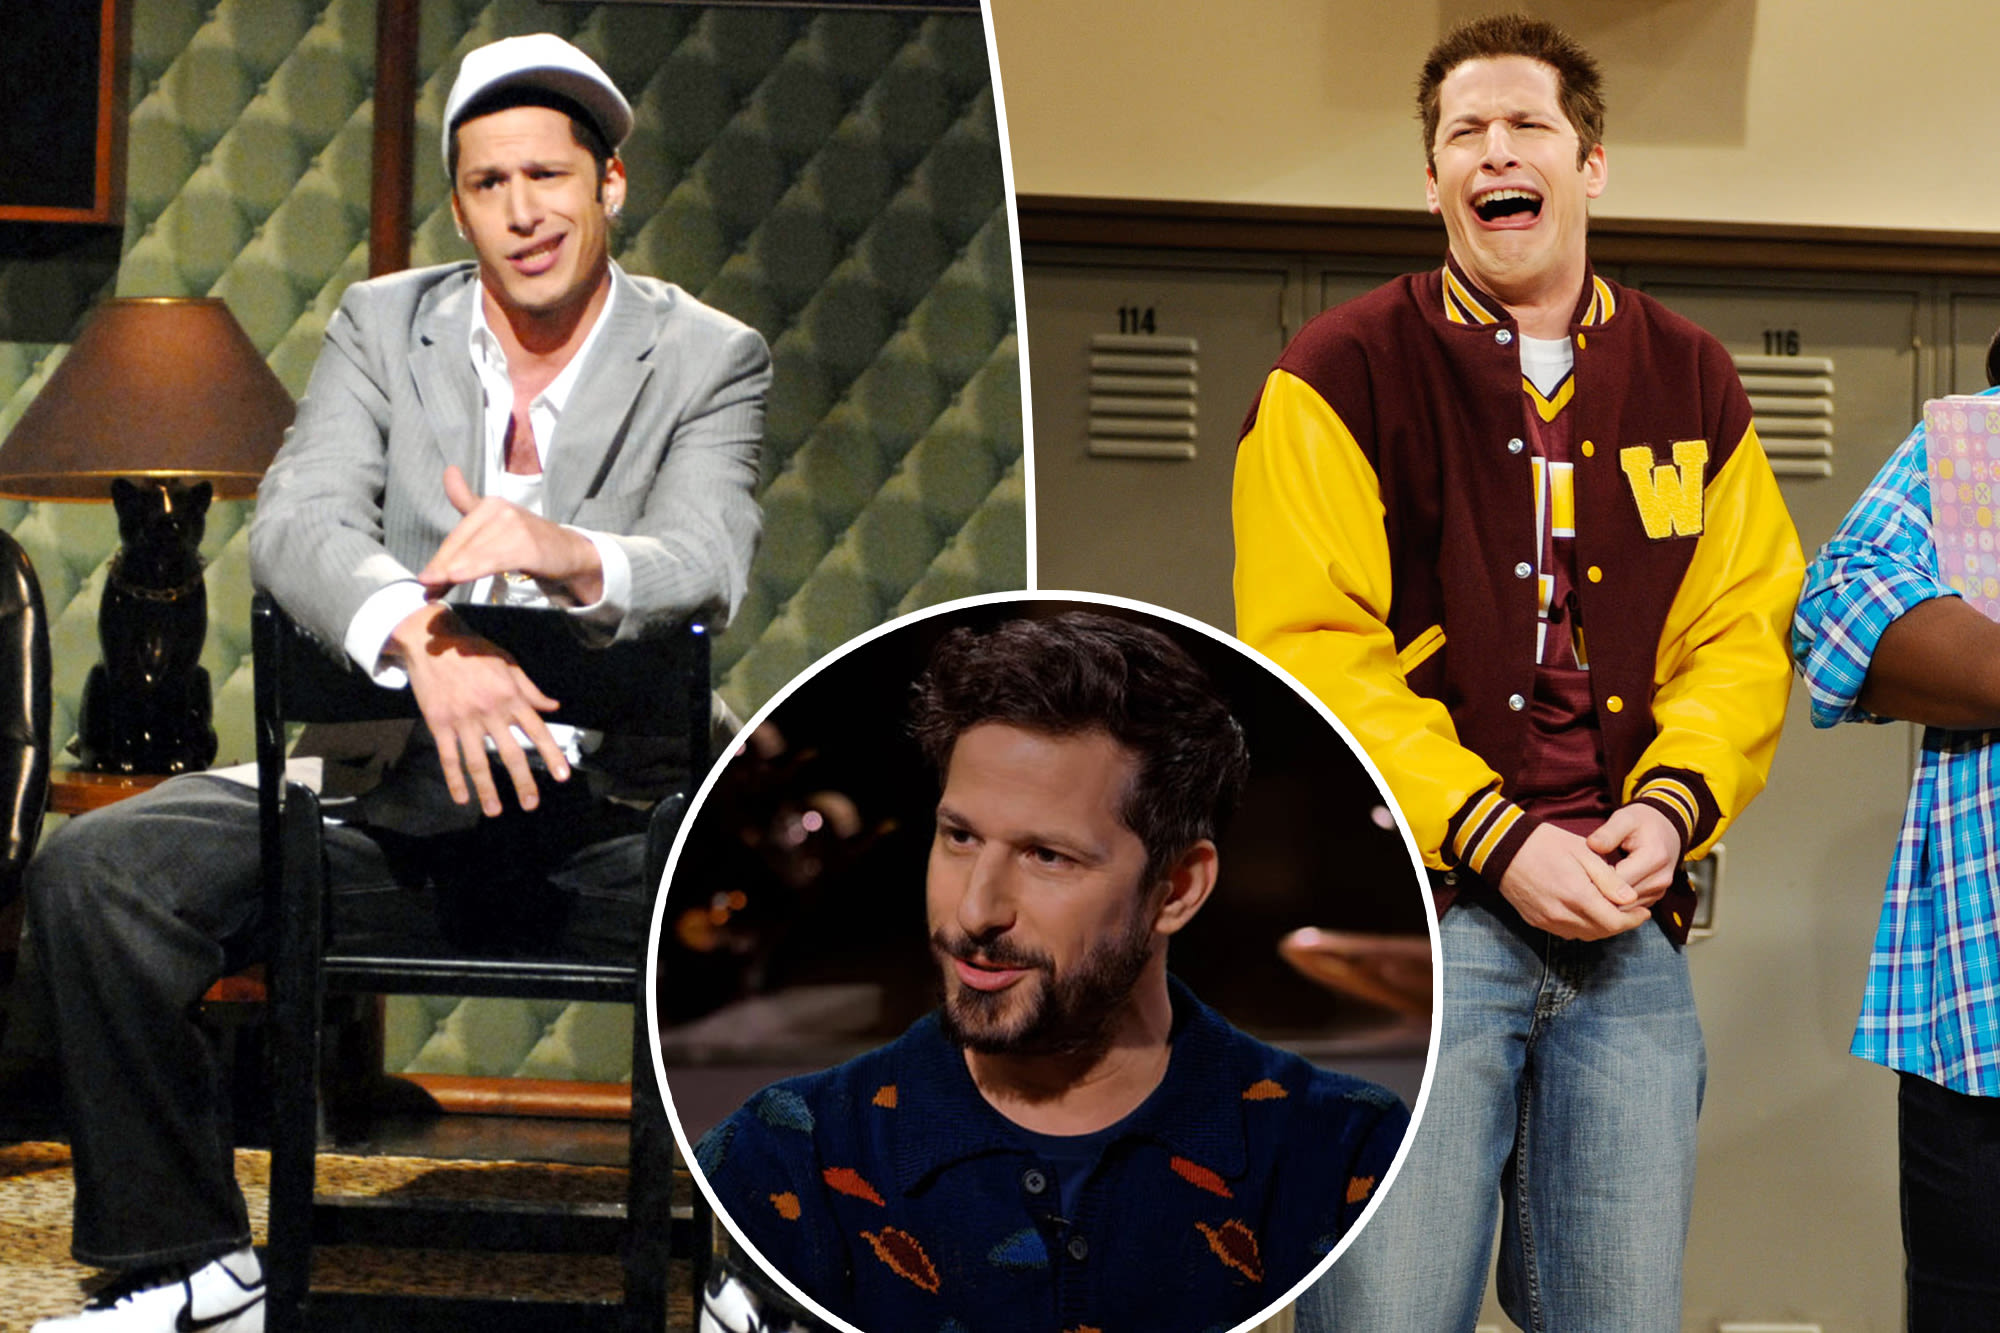 Andy Samberg reveals why he left ‘Saturday Night Live’ after 7 seasons: ‘I was falling apart’